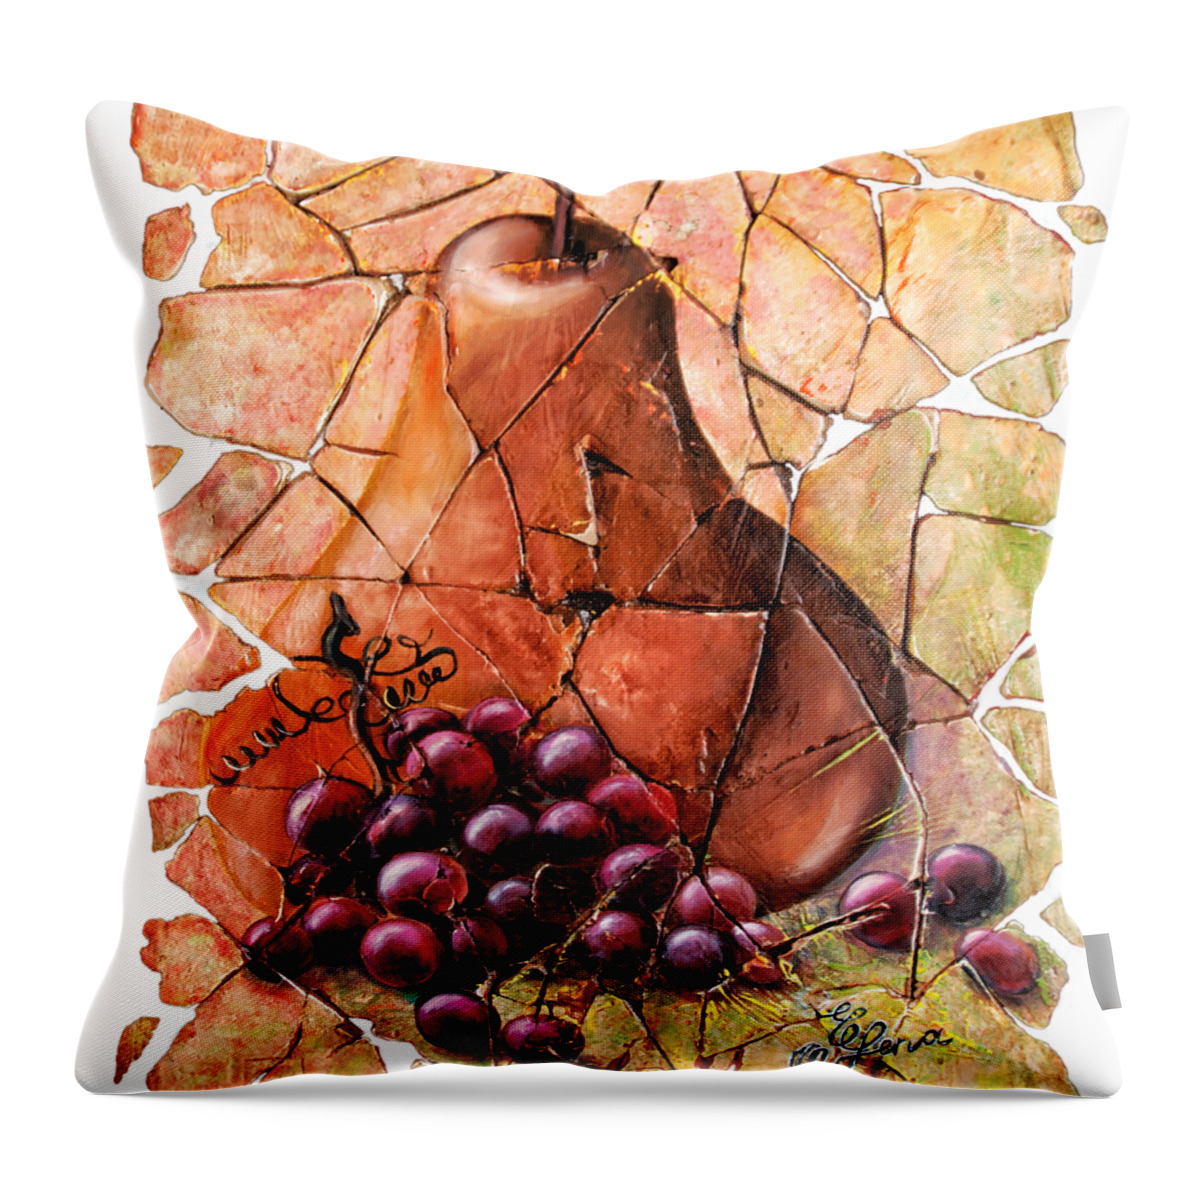 Pear & Grapes Fresco Throw Pillow featuring the painting Pear and Grapes Fresco by OLena Art